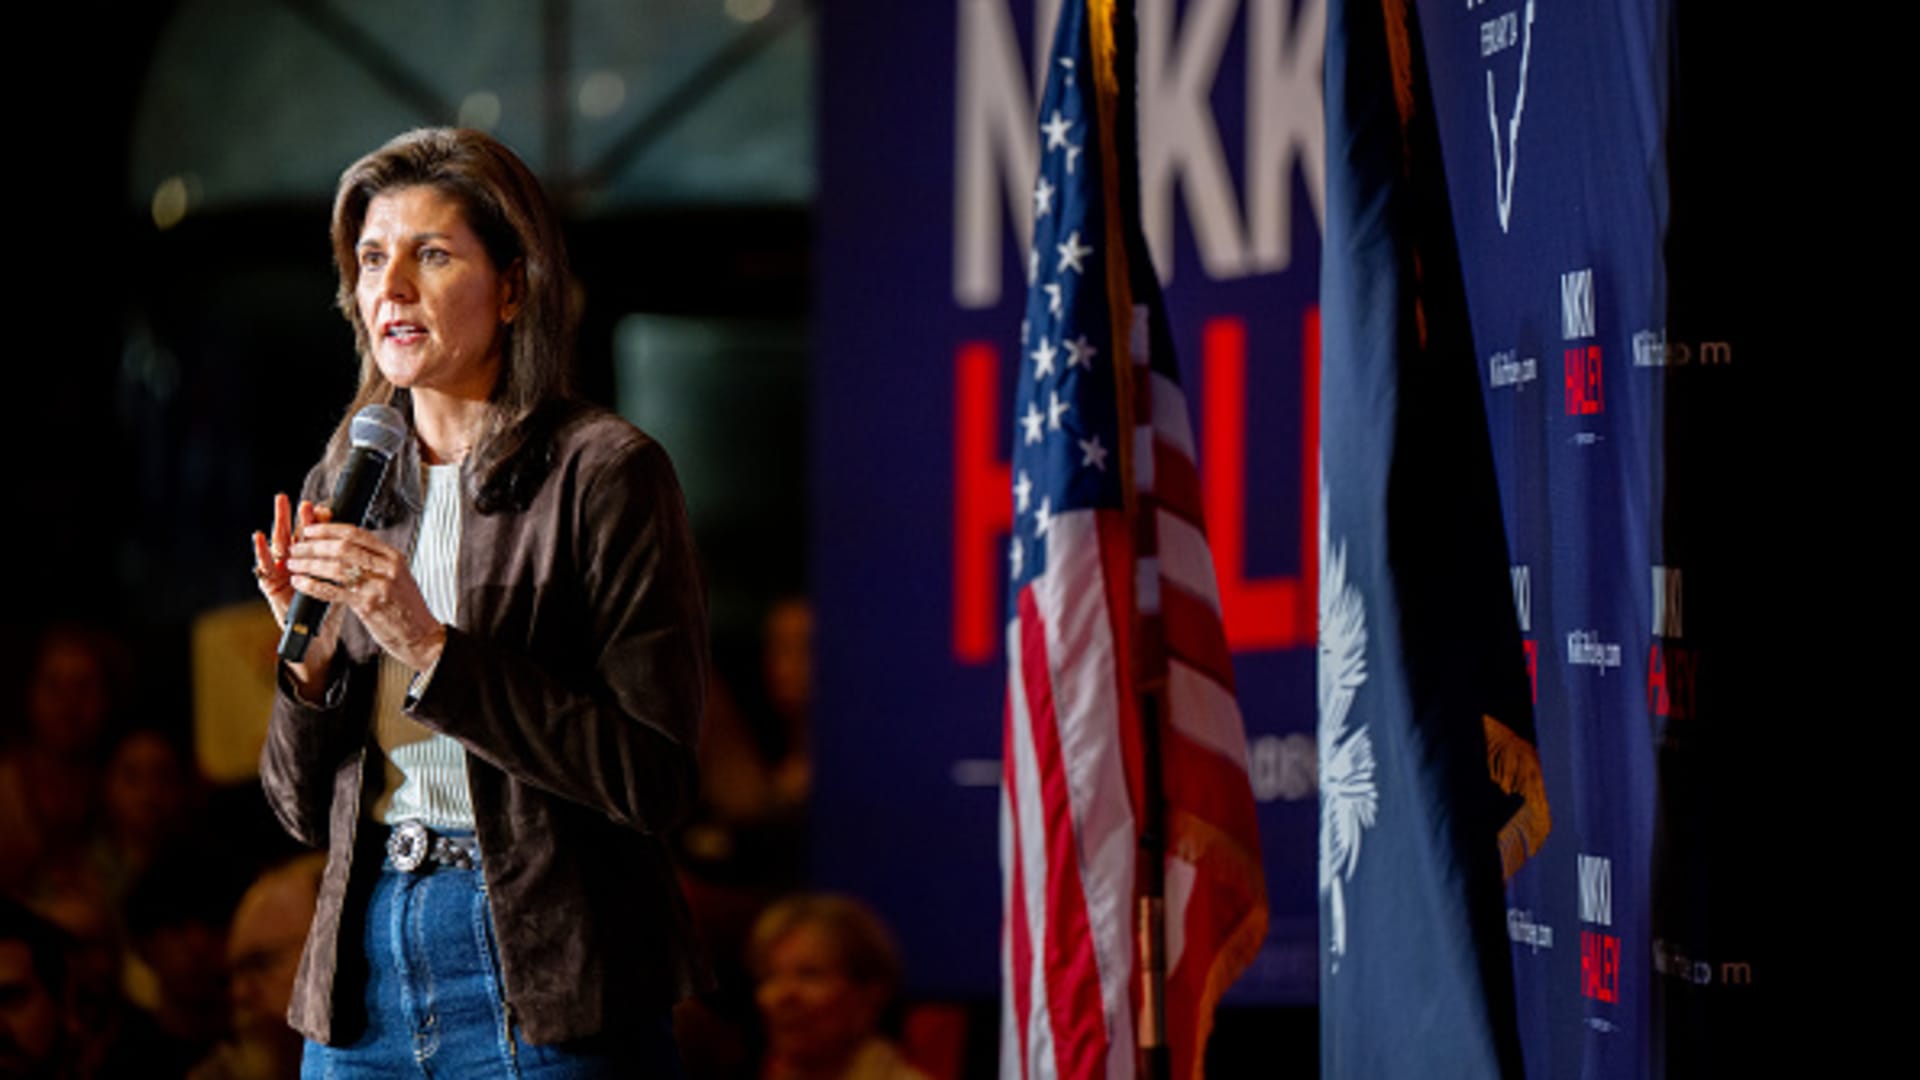 'None of these candidates' defeats Nikki Haley in Nevada Republican main, NBC News projects